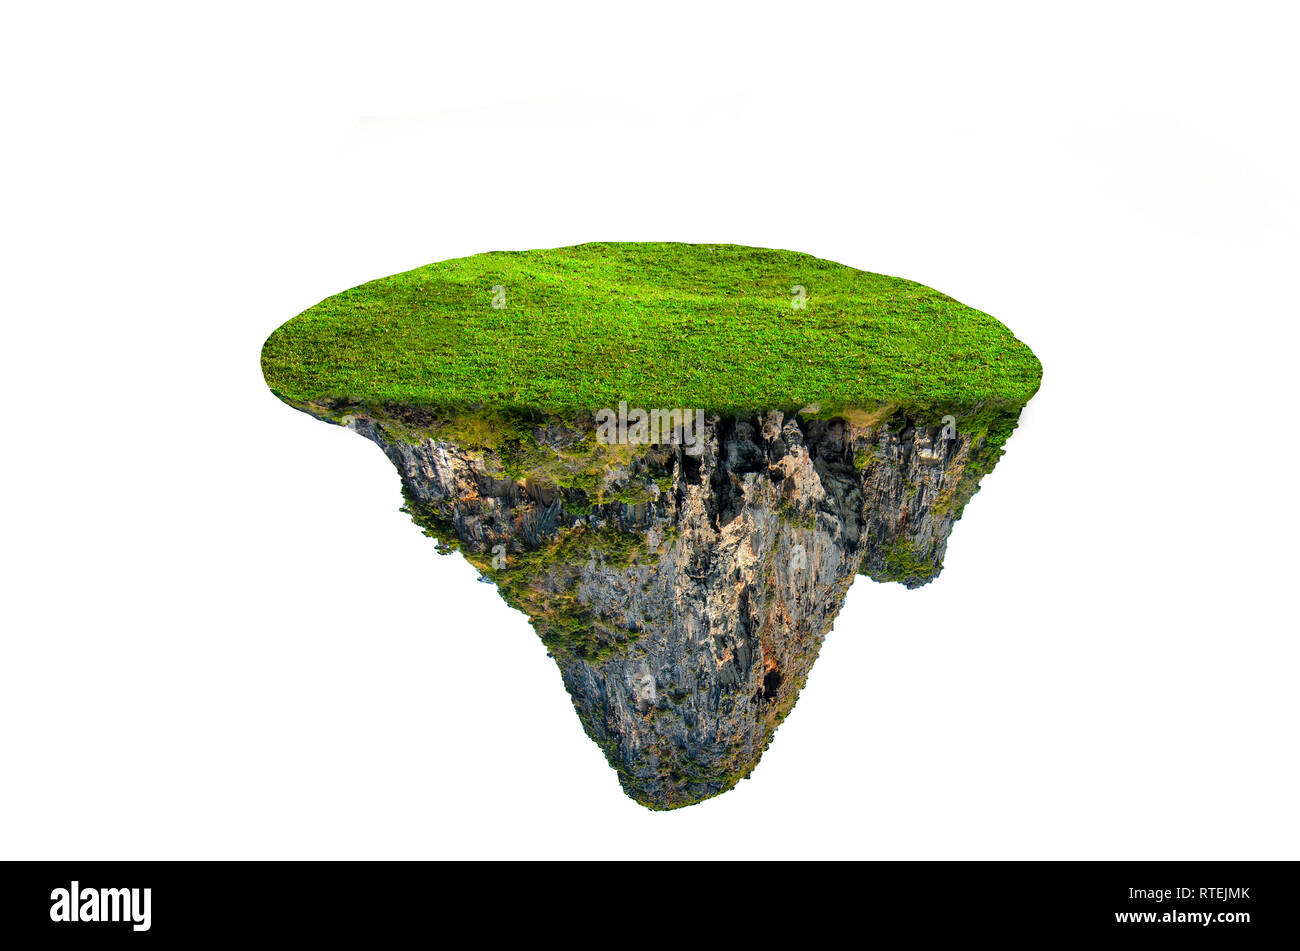 fantasy floating island with natural grass Isolate Stock Photo